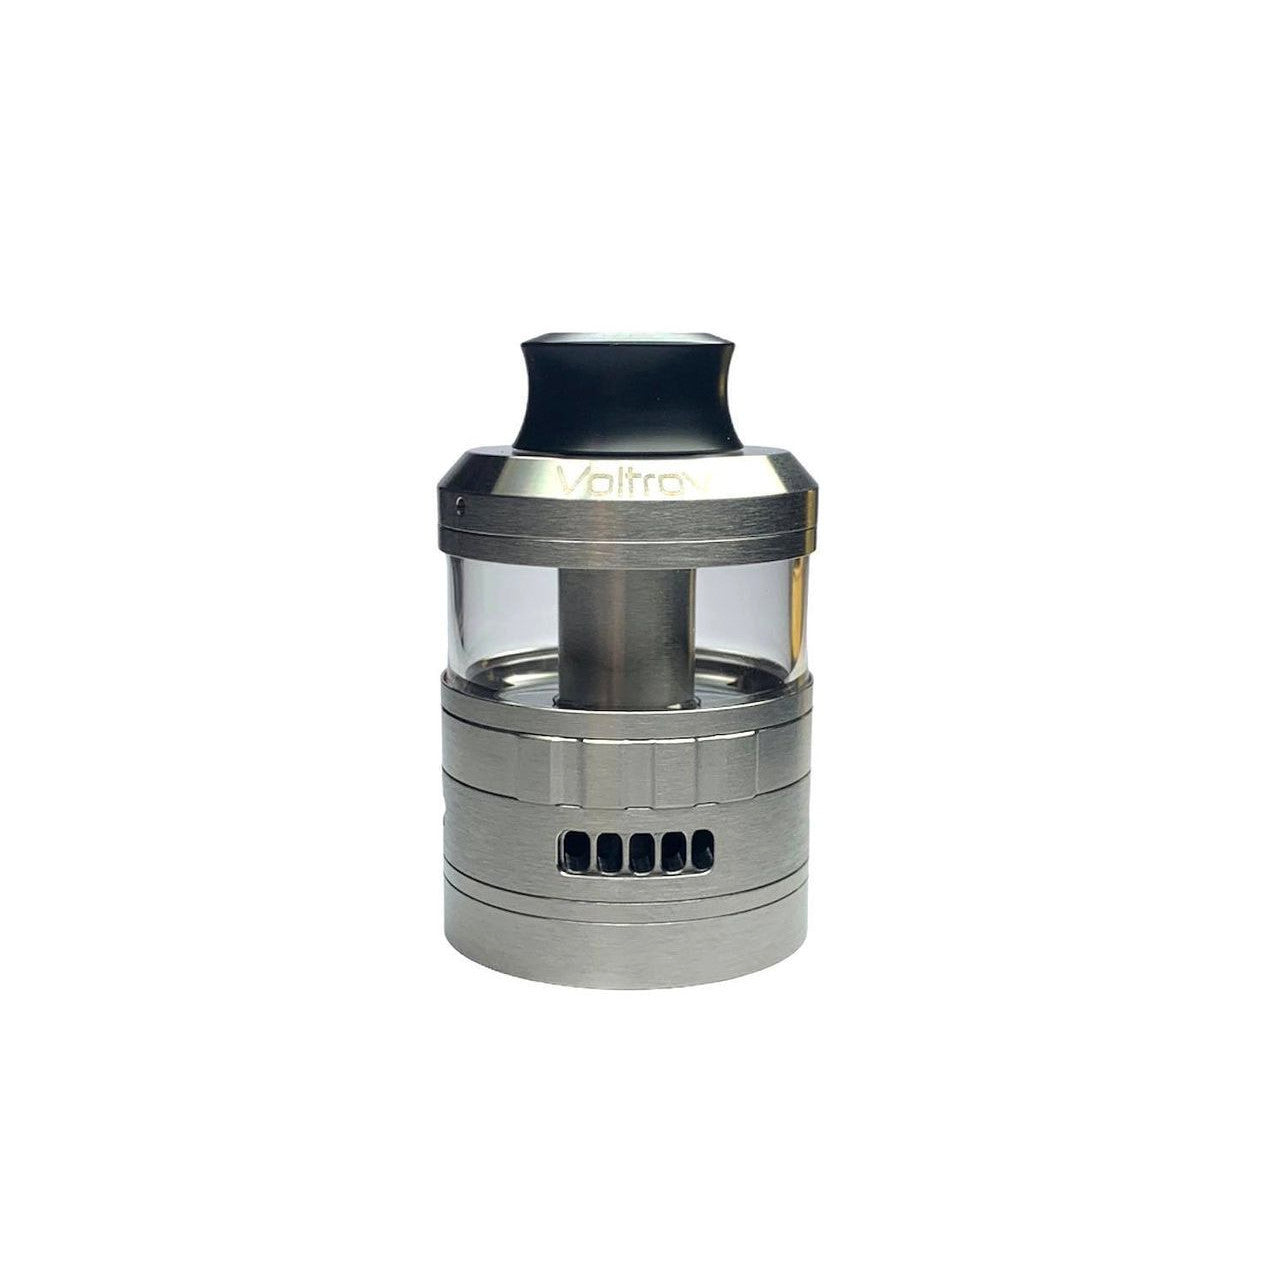 Voltrove 38mm v2 RTA (2 Deck) (VERY Limited Supply Remaining)